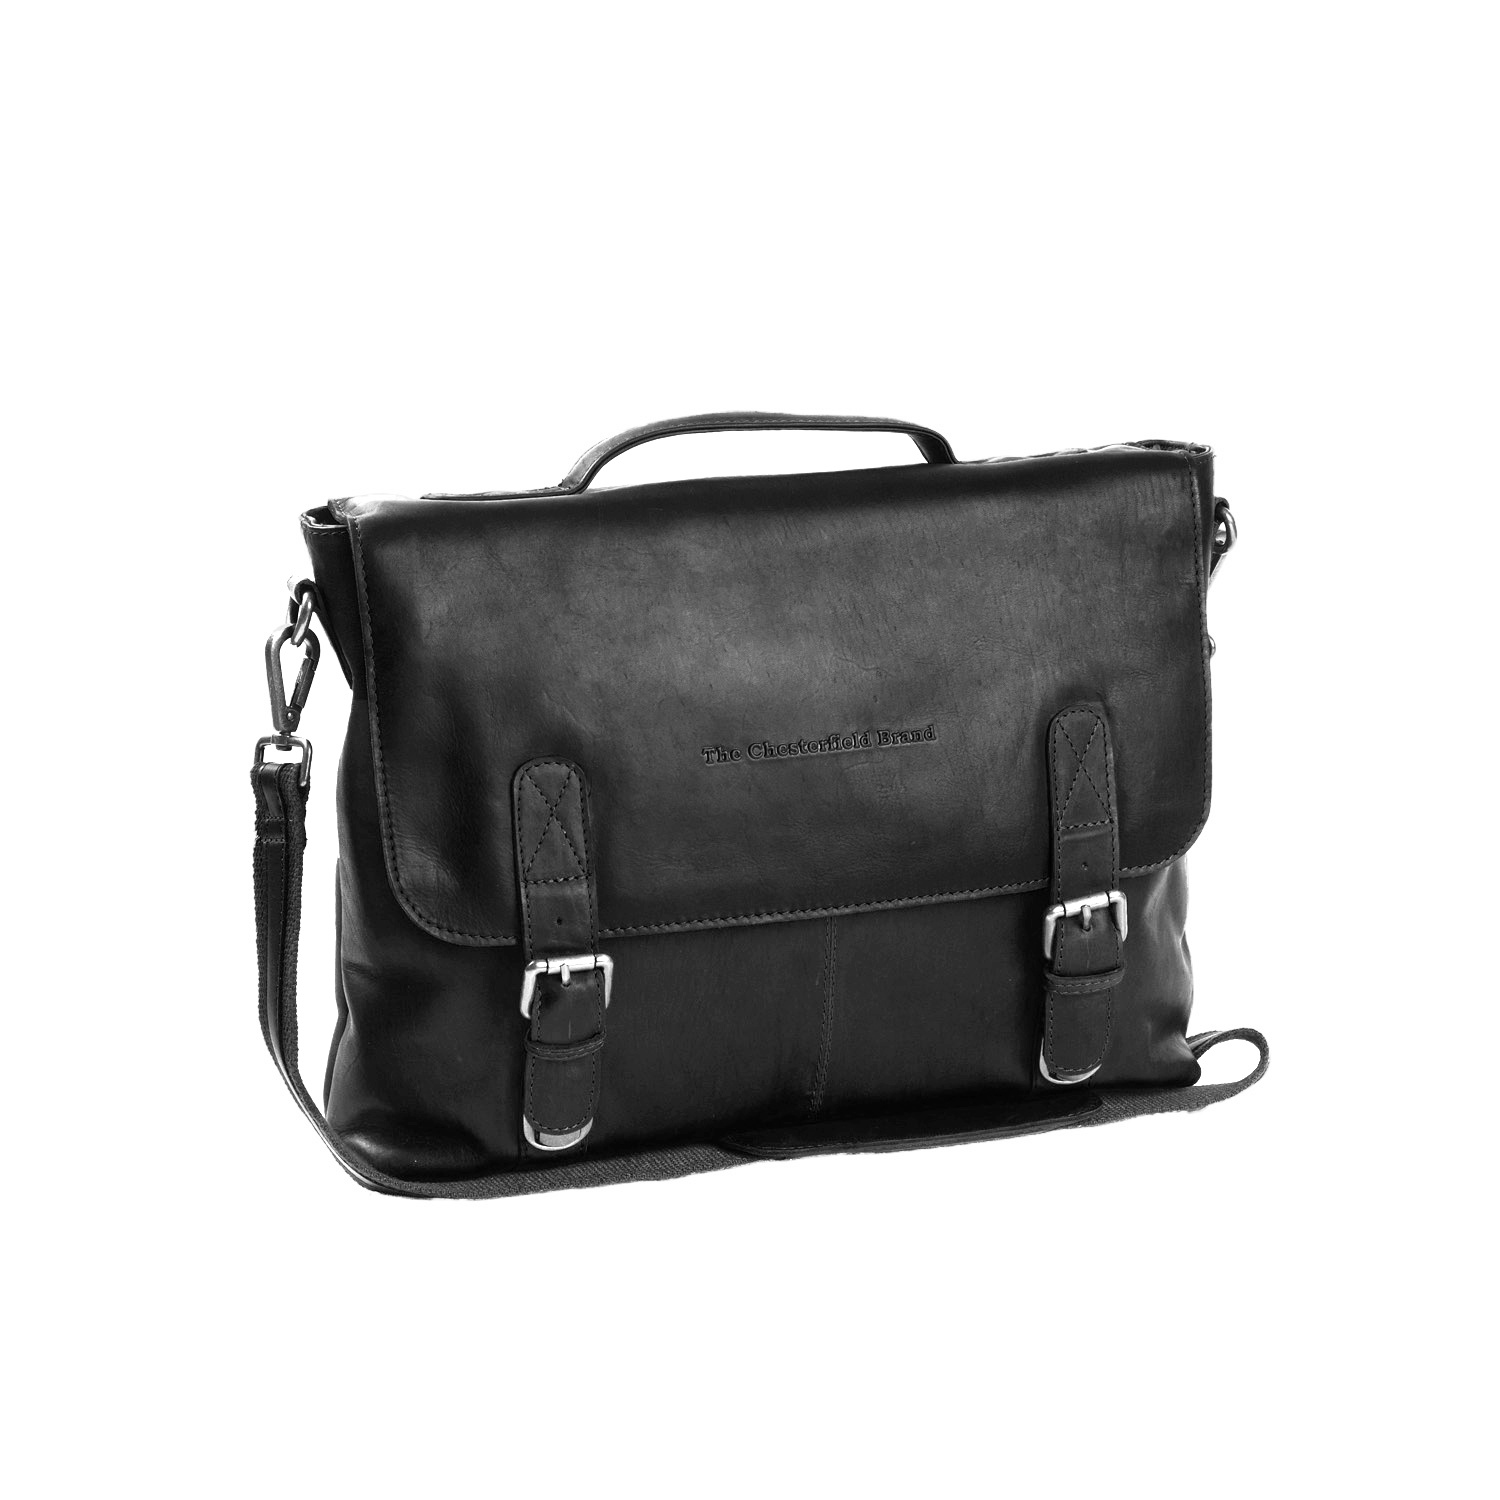 Leather Shoulder Bag Black Jules - The Chesterfield Brand